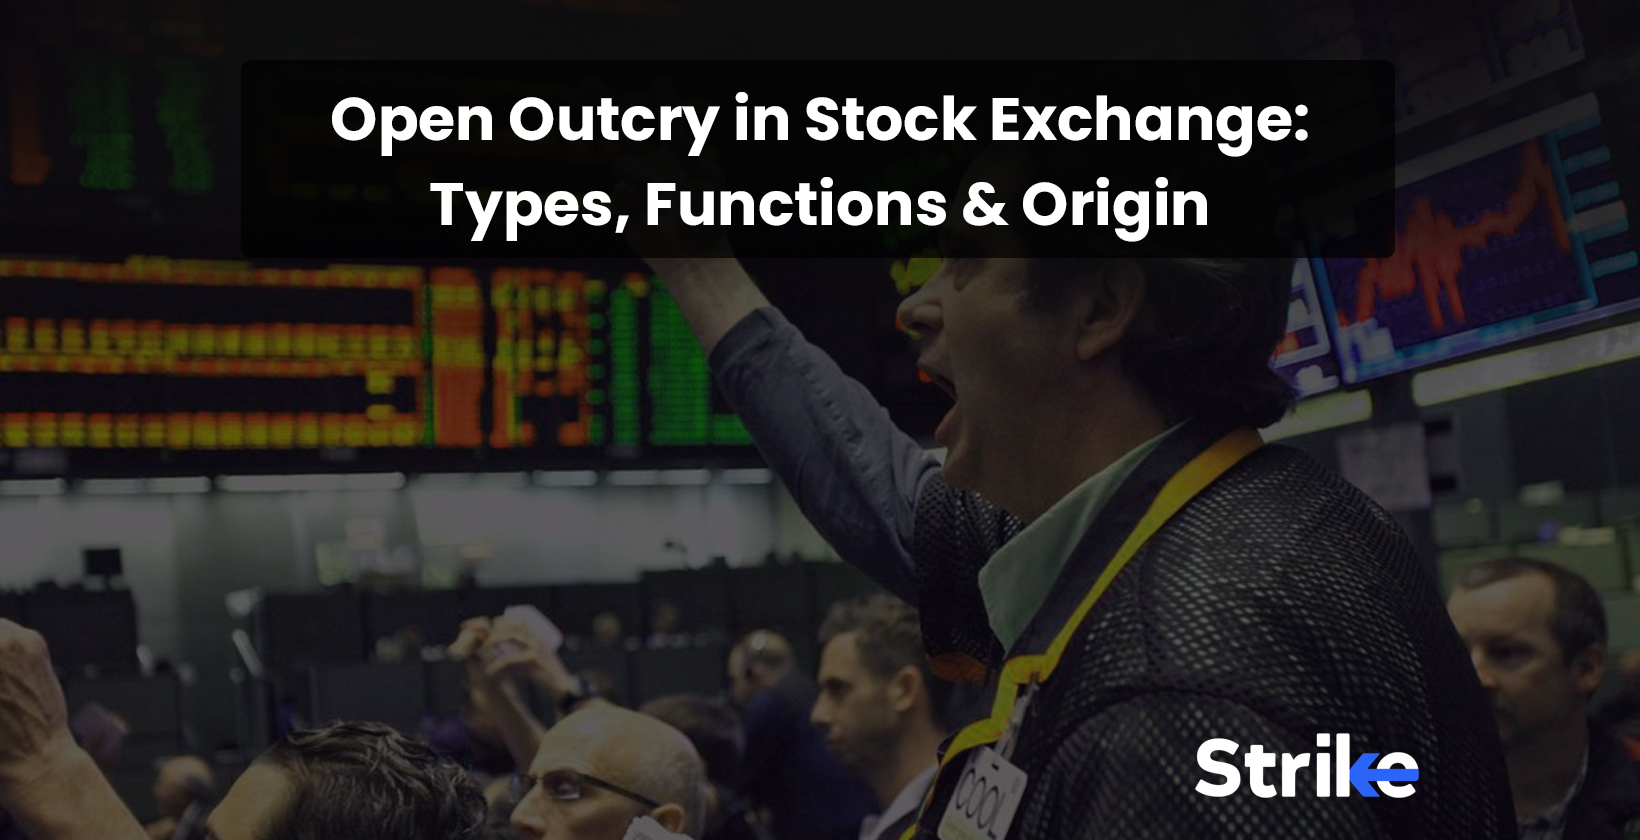 Open Outcry in Stock Exchange Types, Functions, and Origin